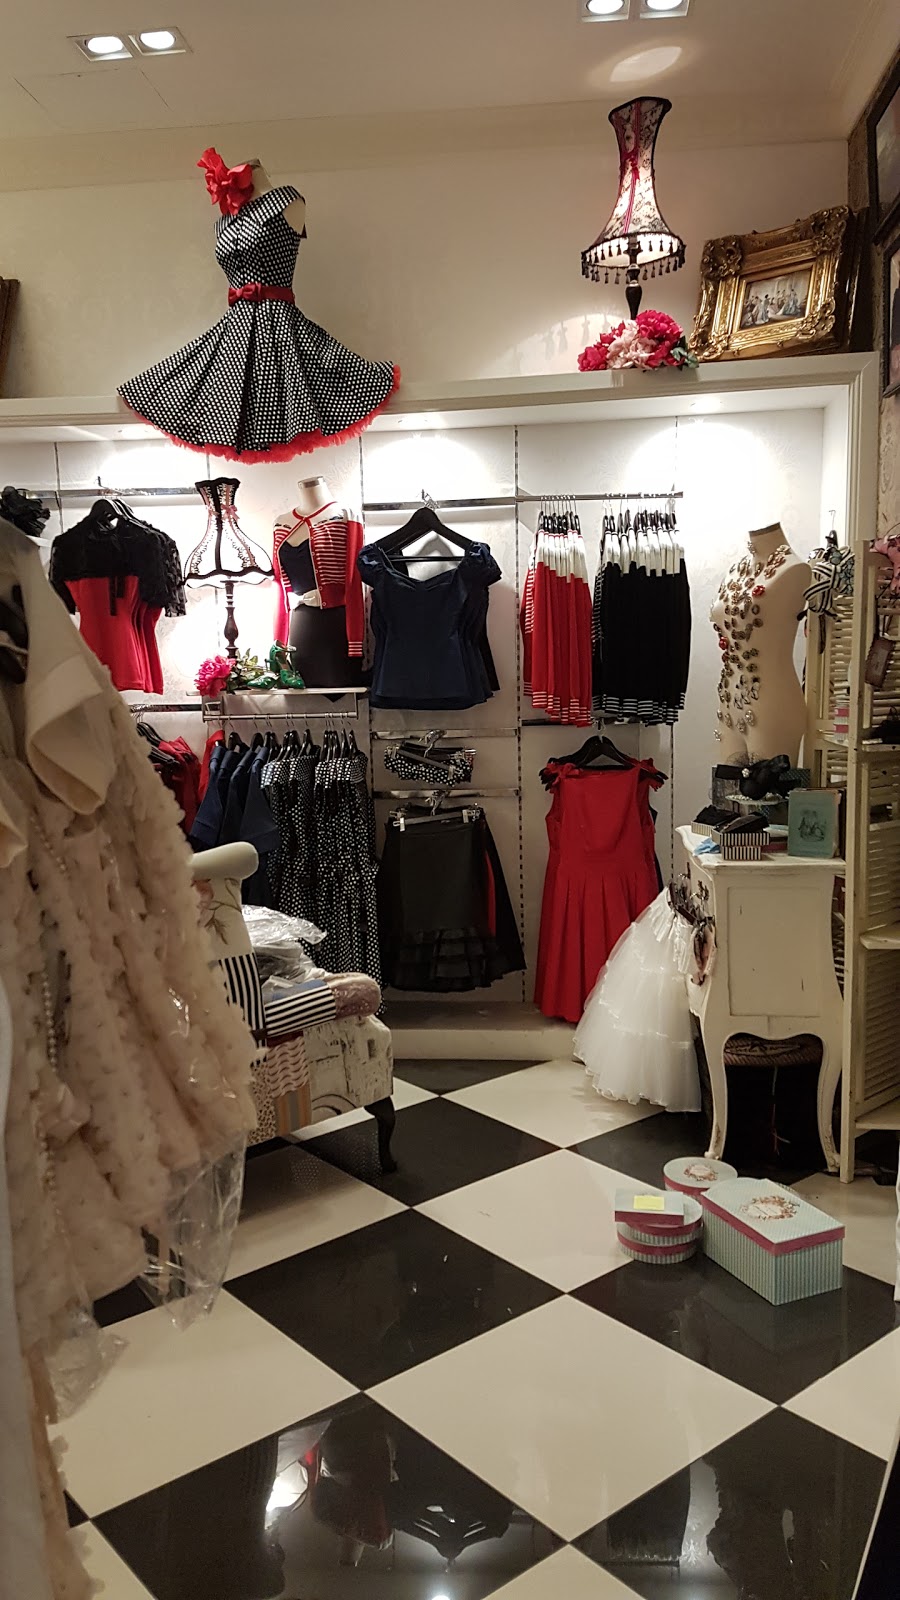 Kitten DAmour | clothing store | 546/1 Anderson St, Chatswood NSW 2067, Australia | 0294111053 OR +61 2 9411 1053